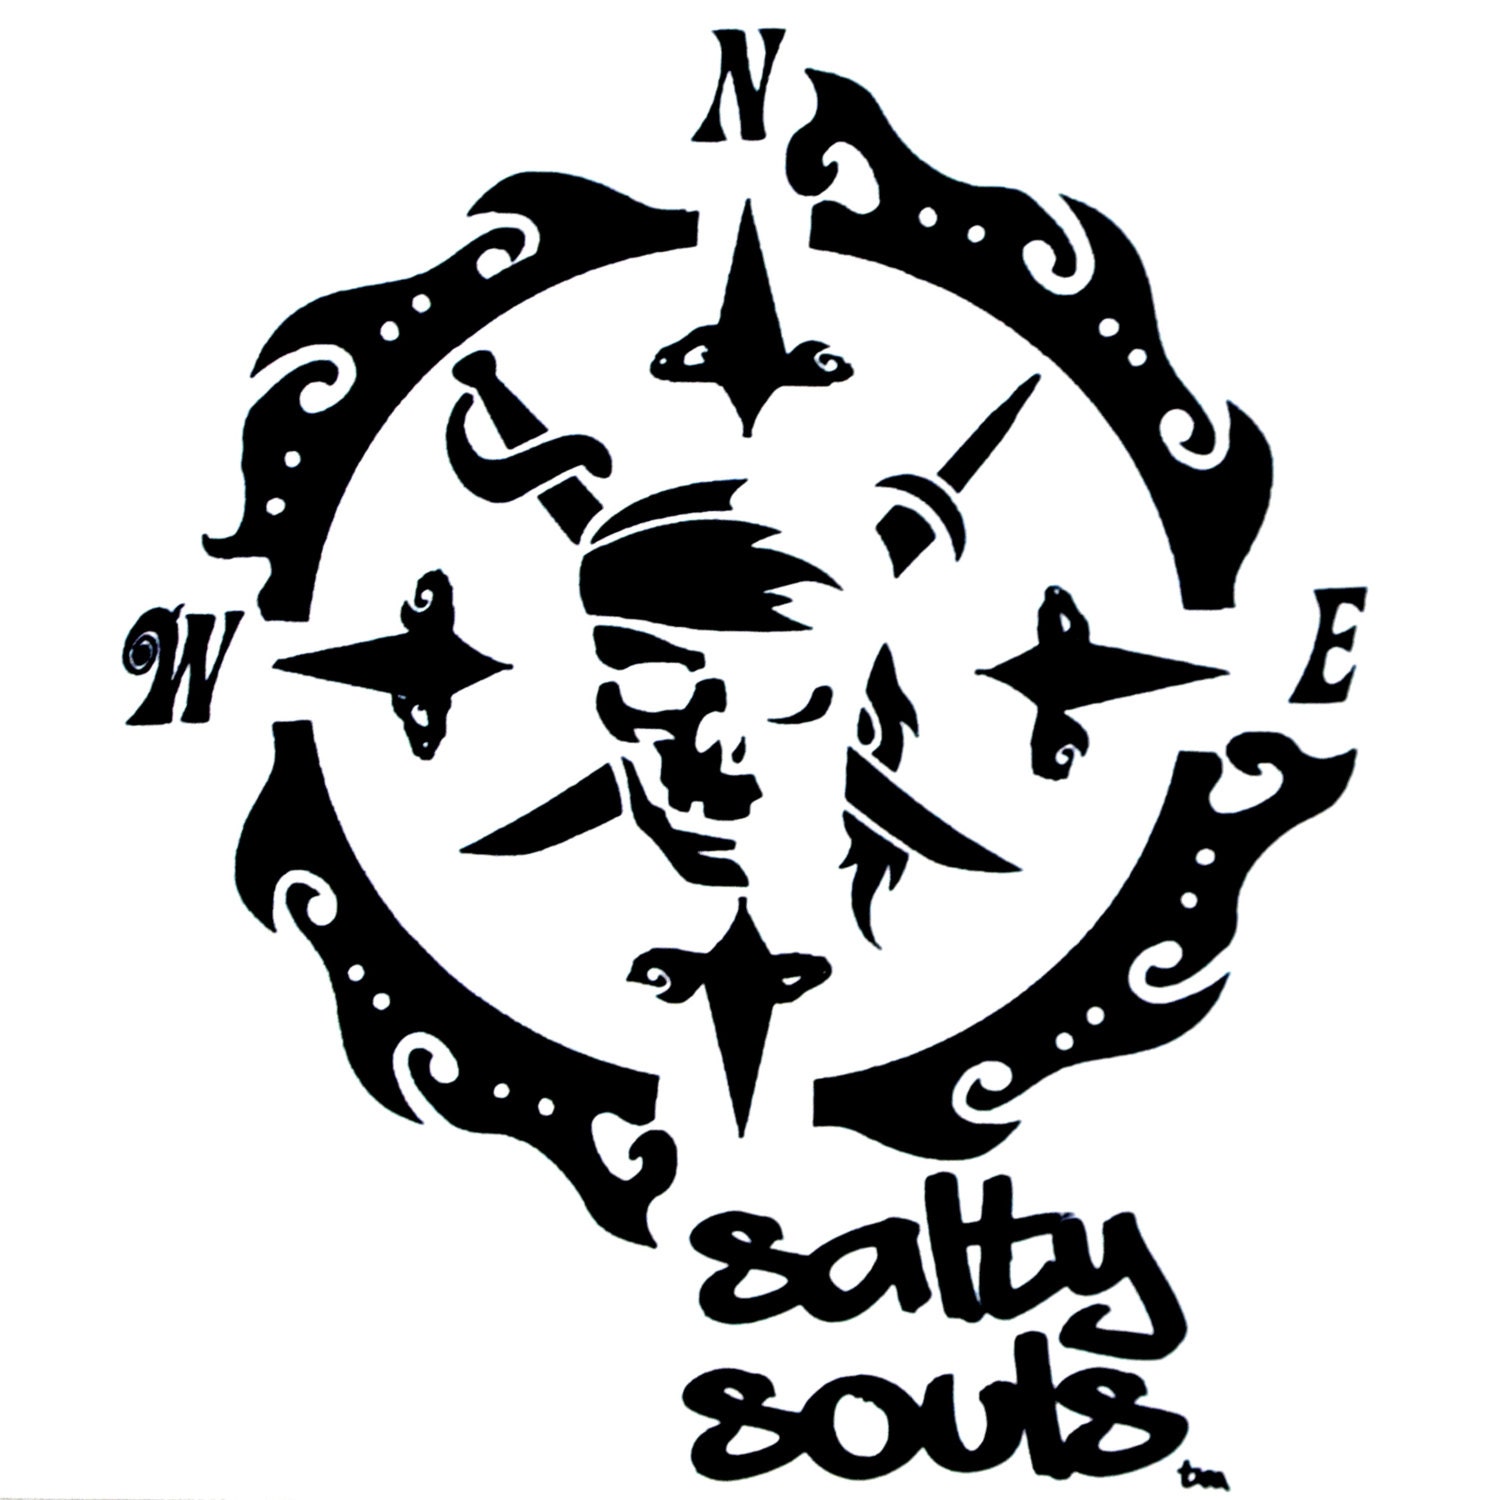 Download Salty Souls Pirate Skull & Compass Logo Sticker Decal ...